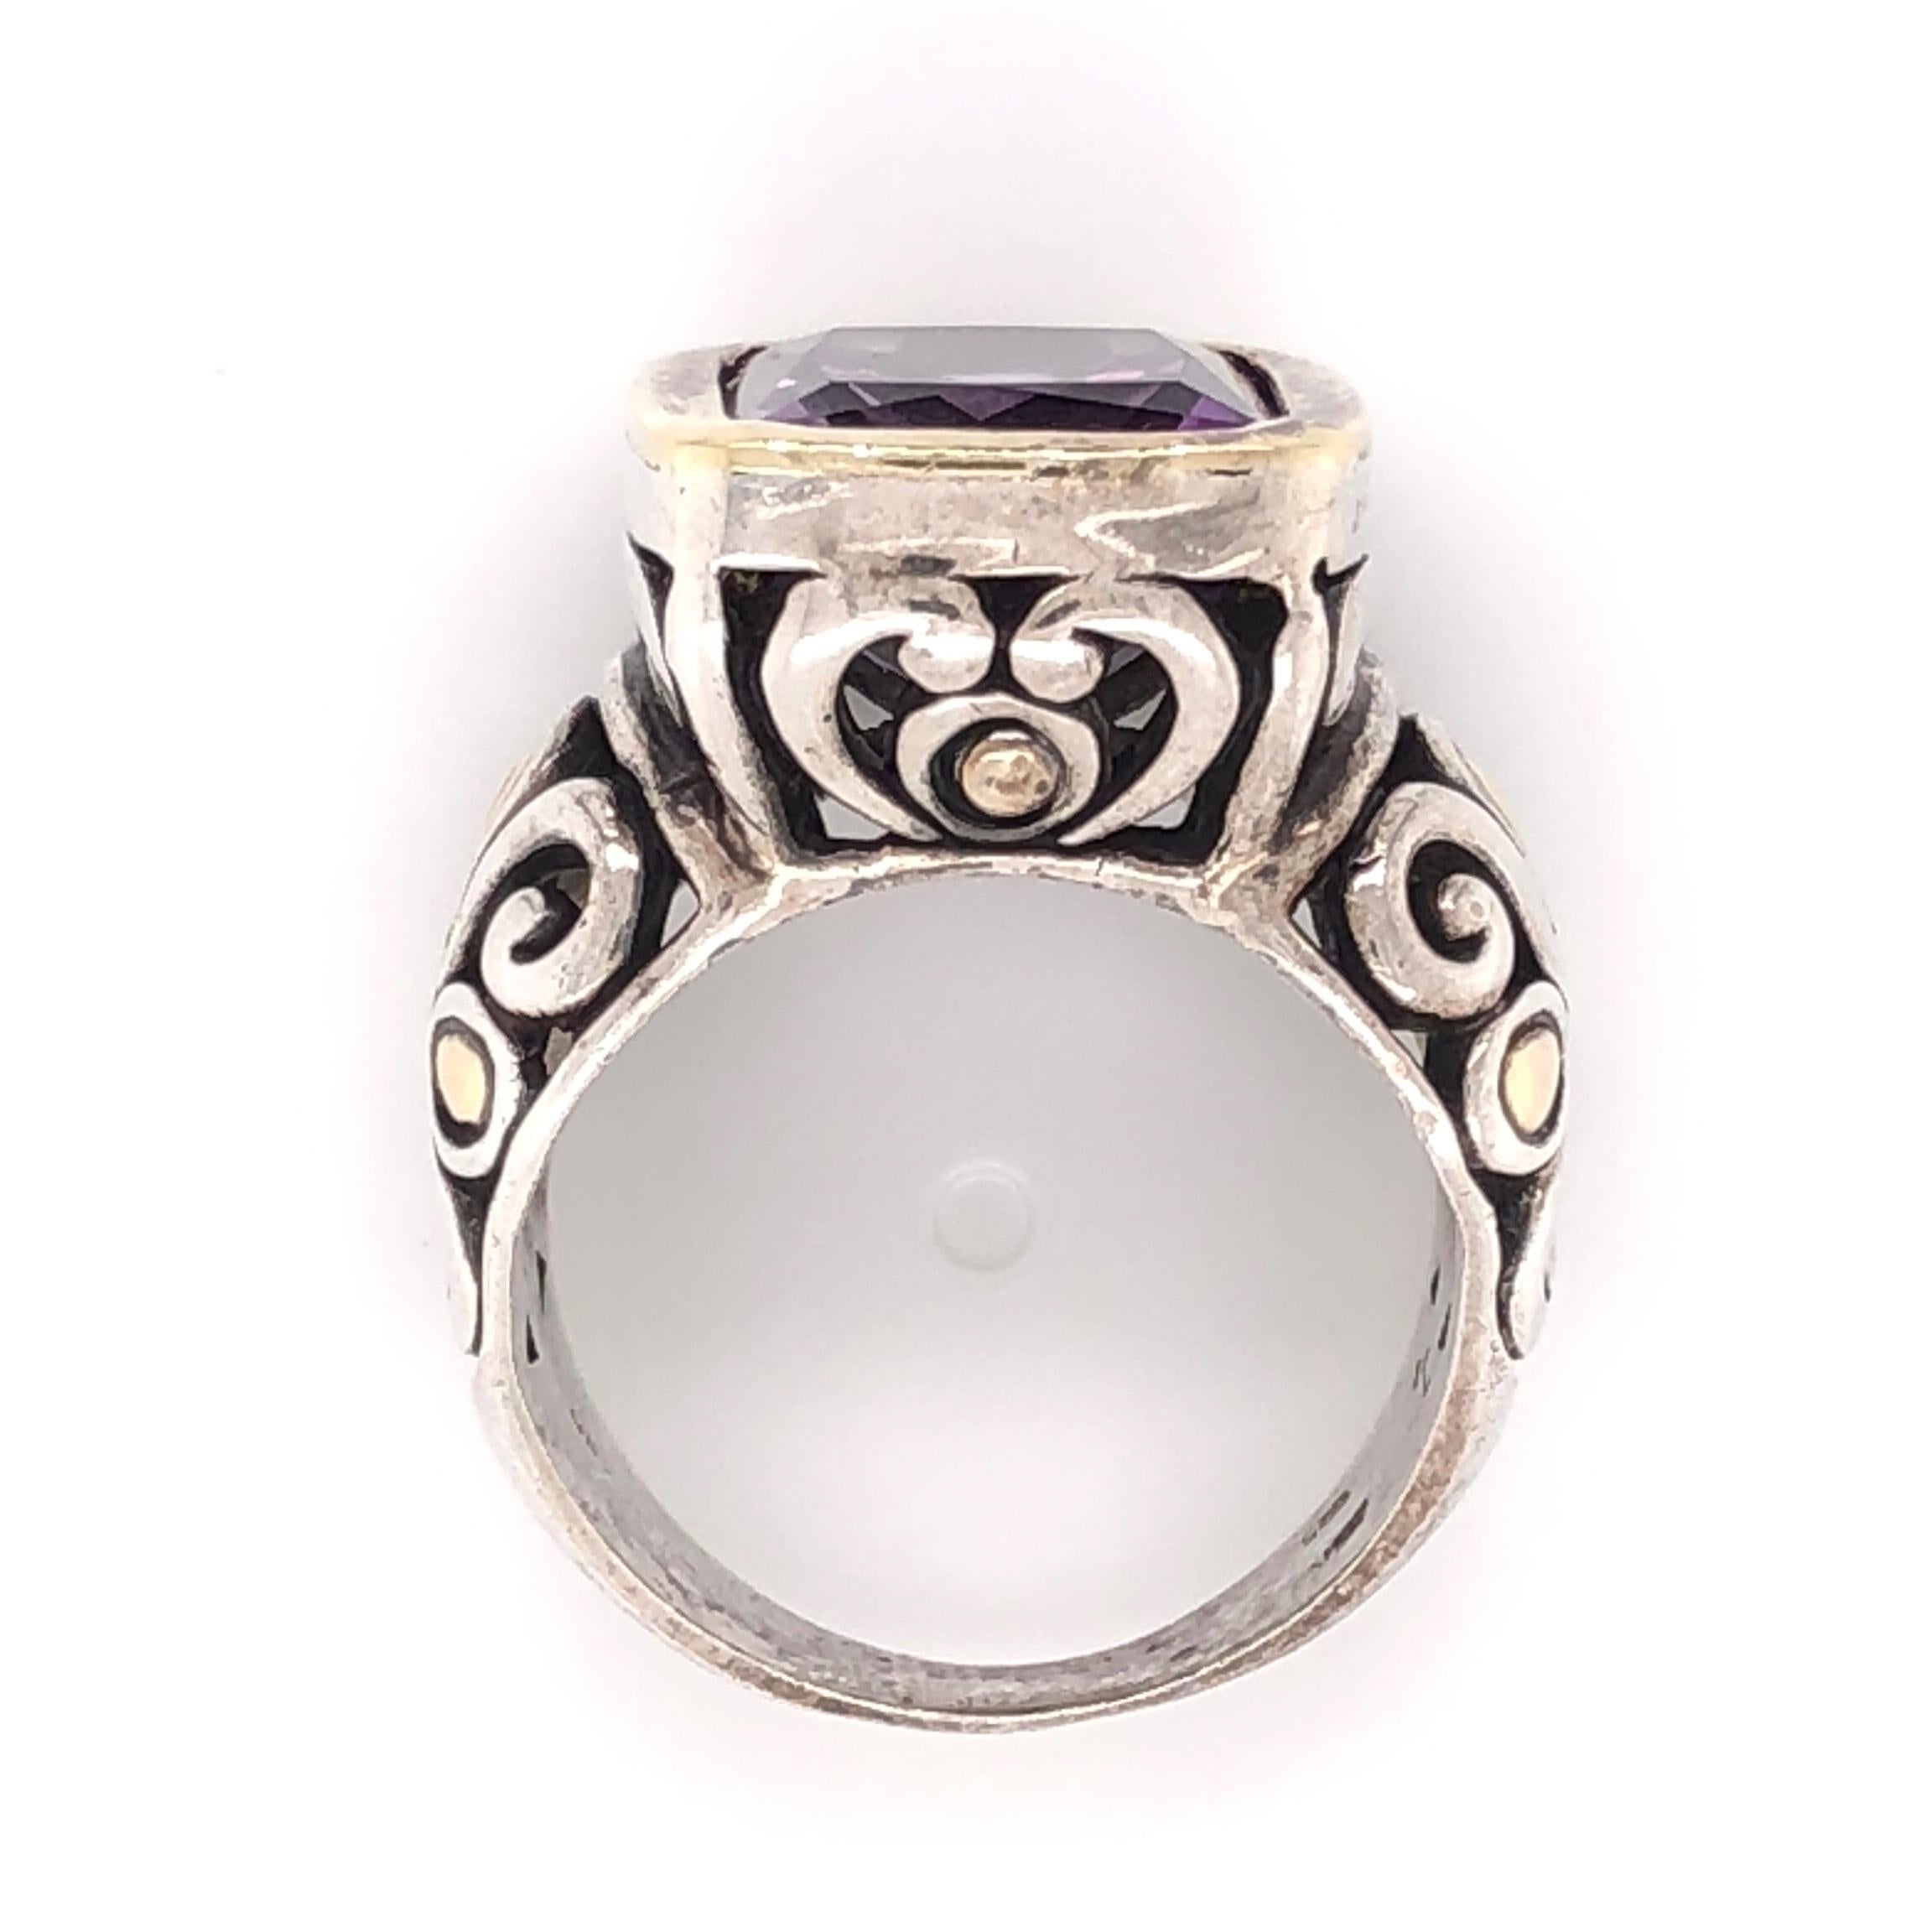 John Hardy 18 Karat Yellow Gold and Sterling Silver Ring, center securely set with an Amethyst. Ring Size 7. Beautifully Hand crafted in 18 Karat Yellow Gold and Sterling Silver. Classic and Timeless...A perfect compliment to every wardrobe! 